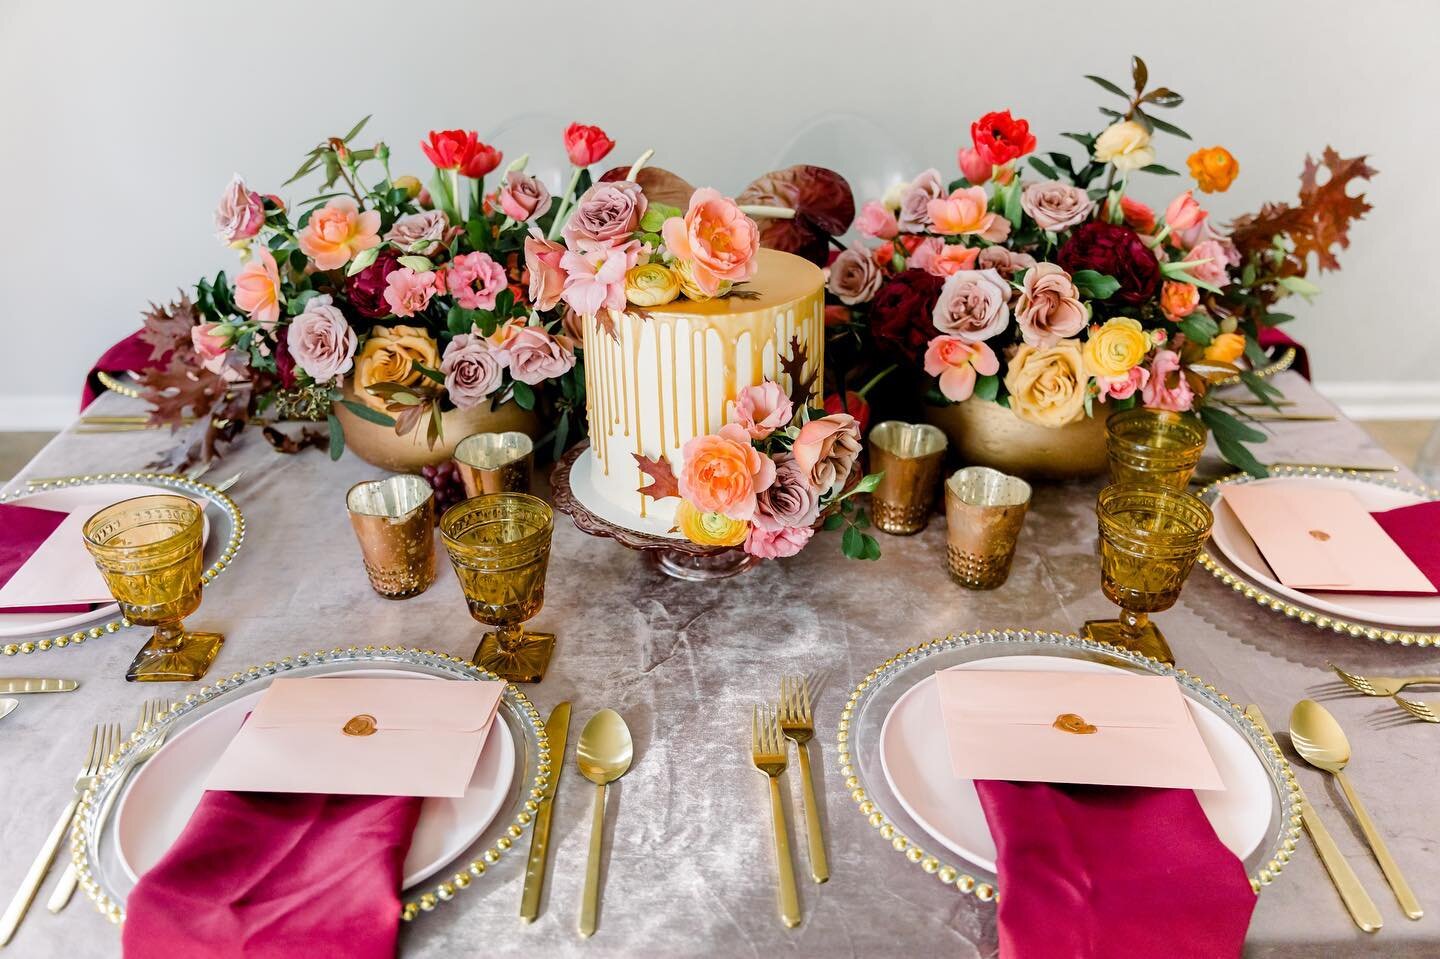 This table and these florals. Holy moly.
Design: @tenpointfloraldesign